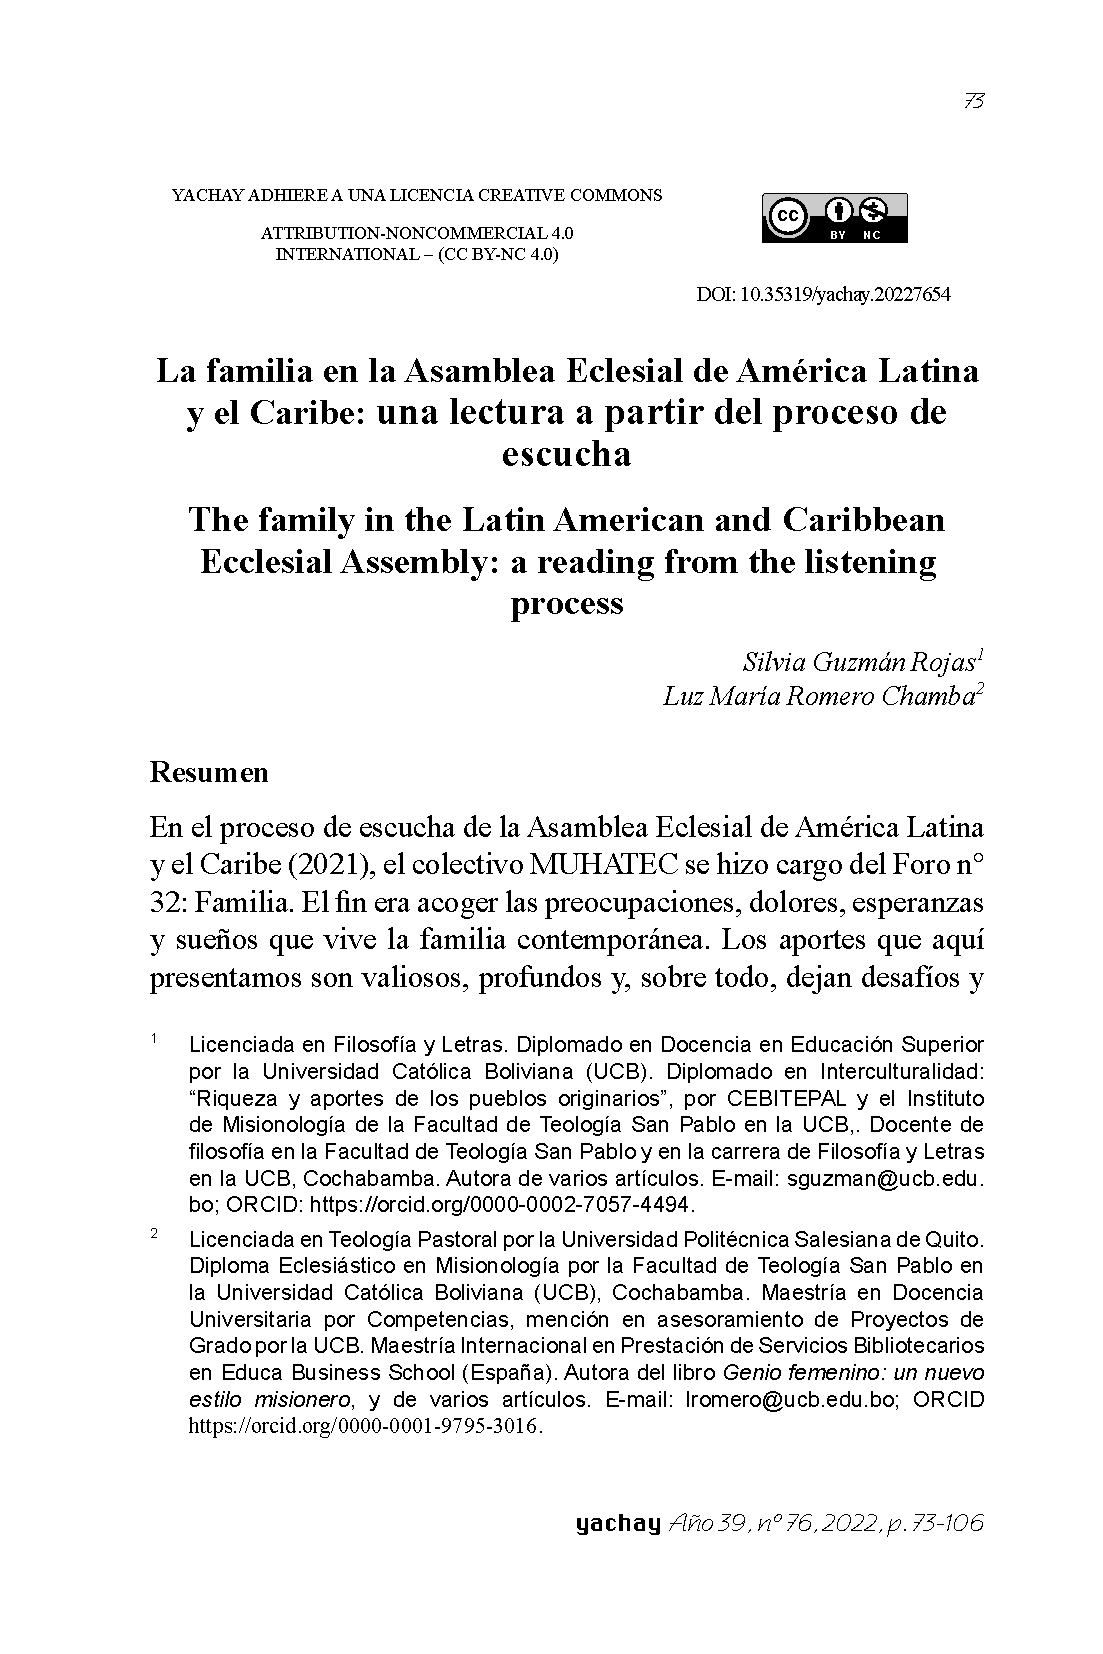 The family in the Latin American and Caribbean Ecclesial Assembly: a reading from the listening process